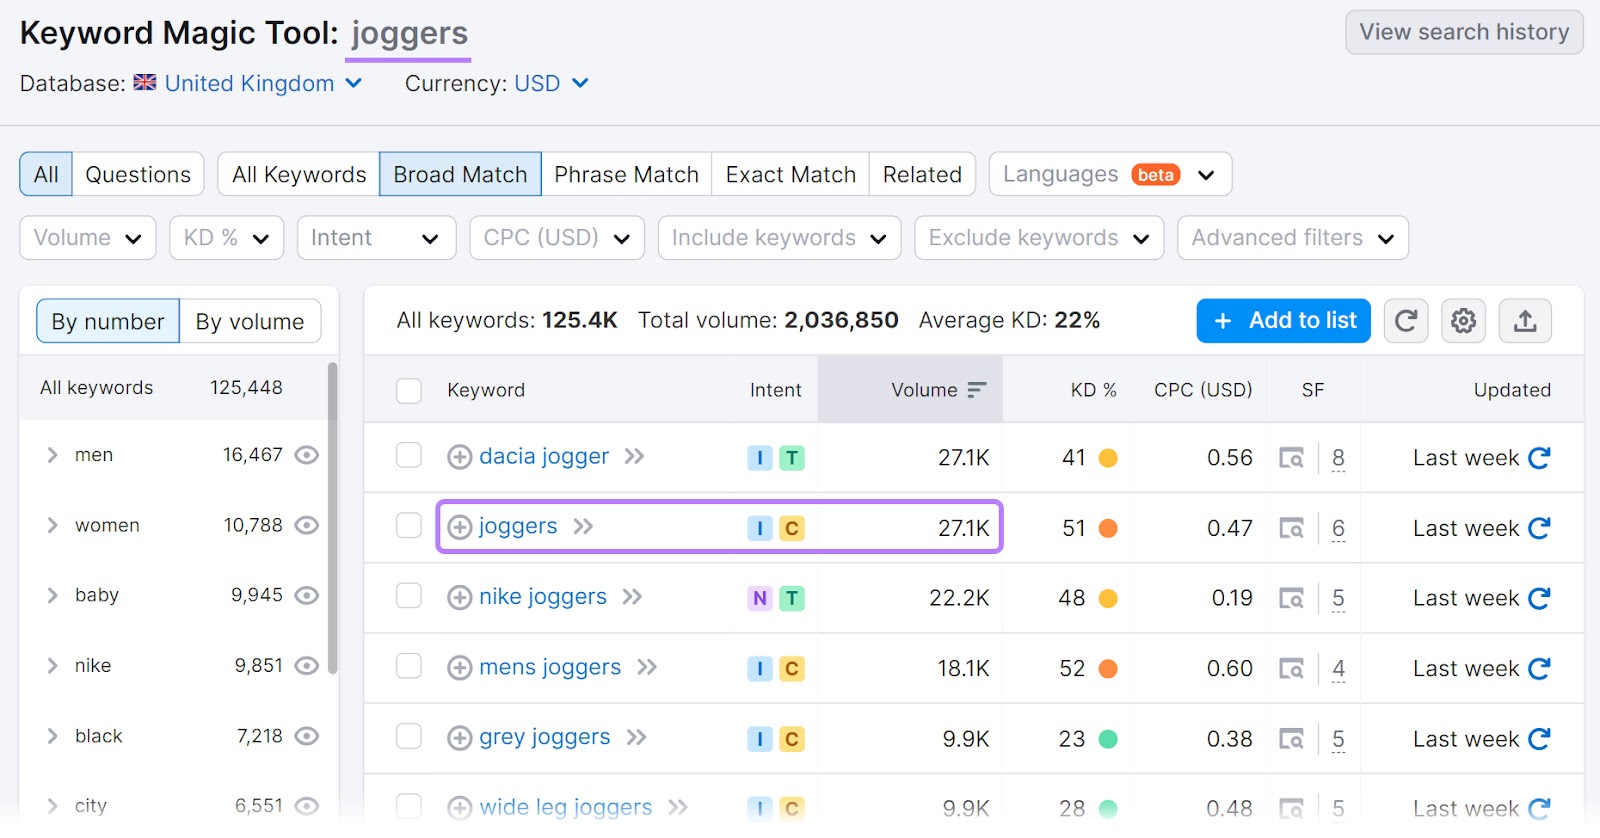 Keyword Magic Tool results for "joggers" search